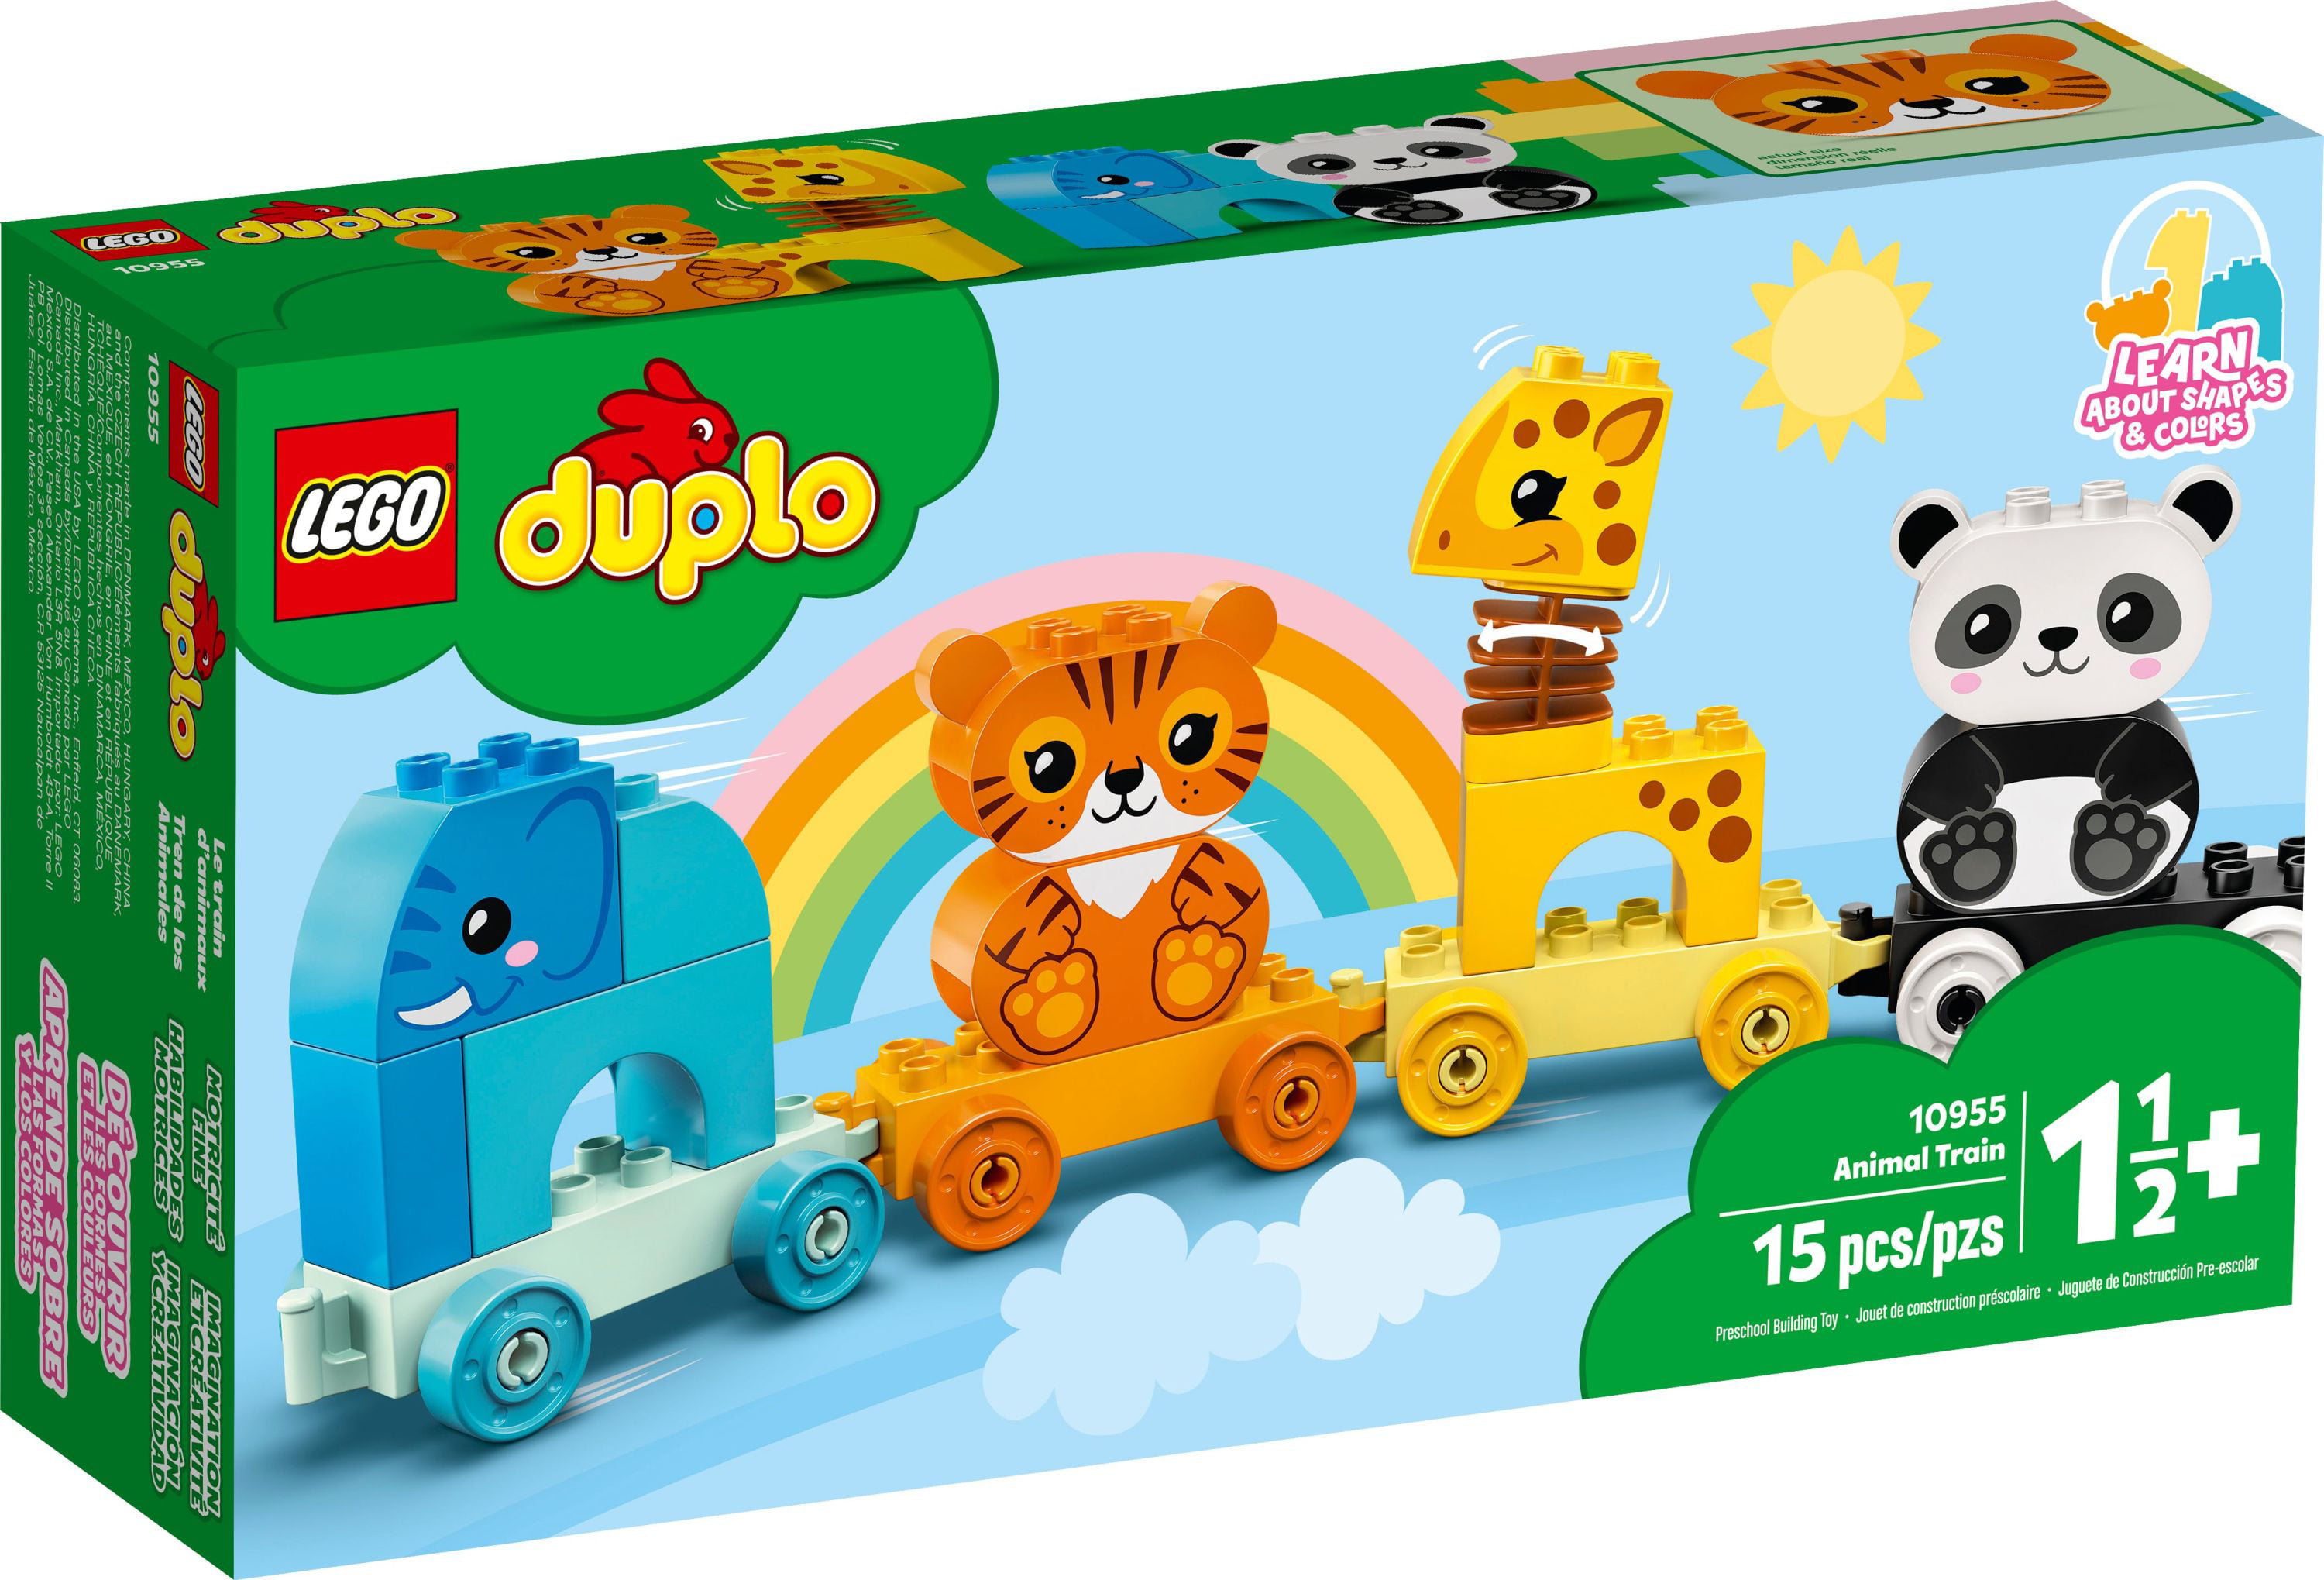 LEGO DUPLO My First Animal Train and Horse Toy 10412 6465036 - Best Buy